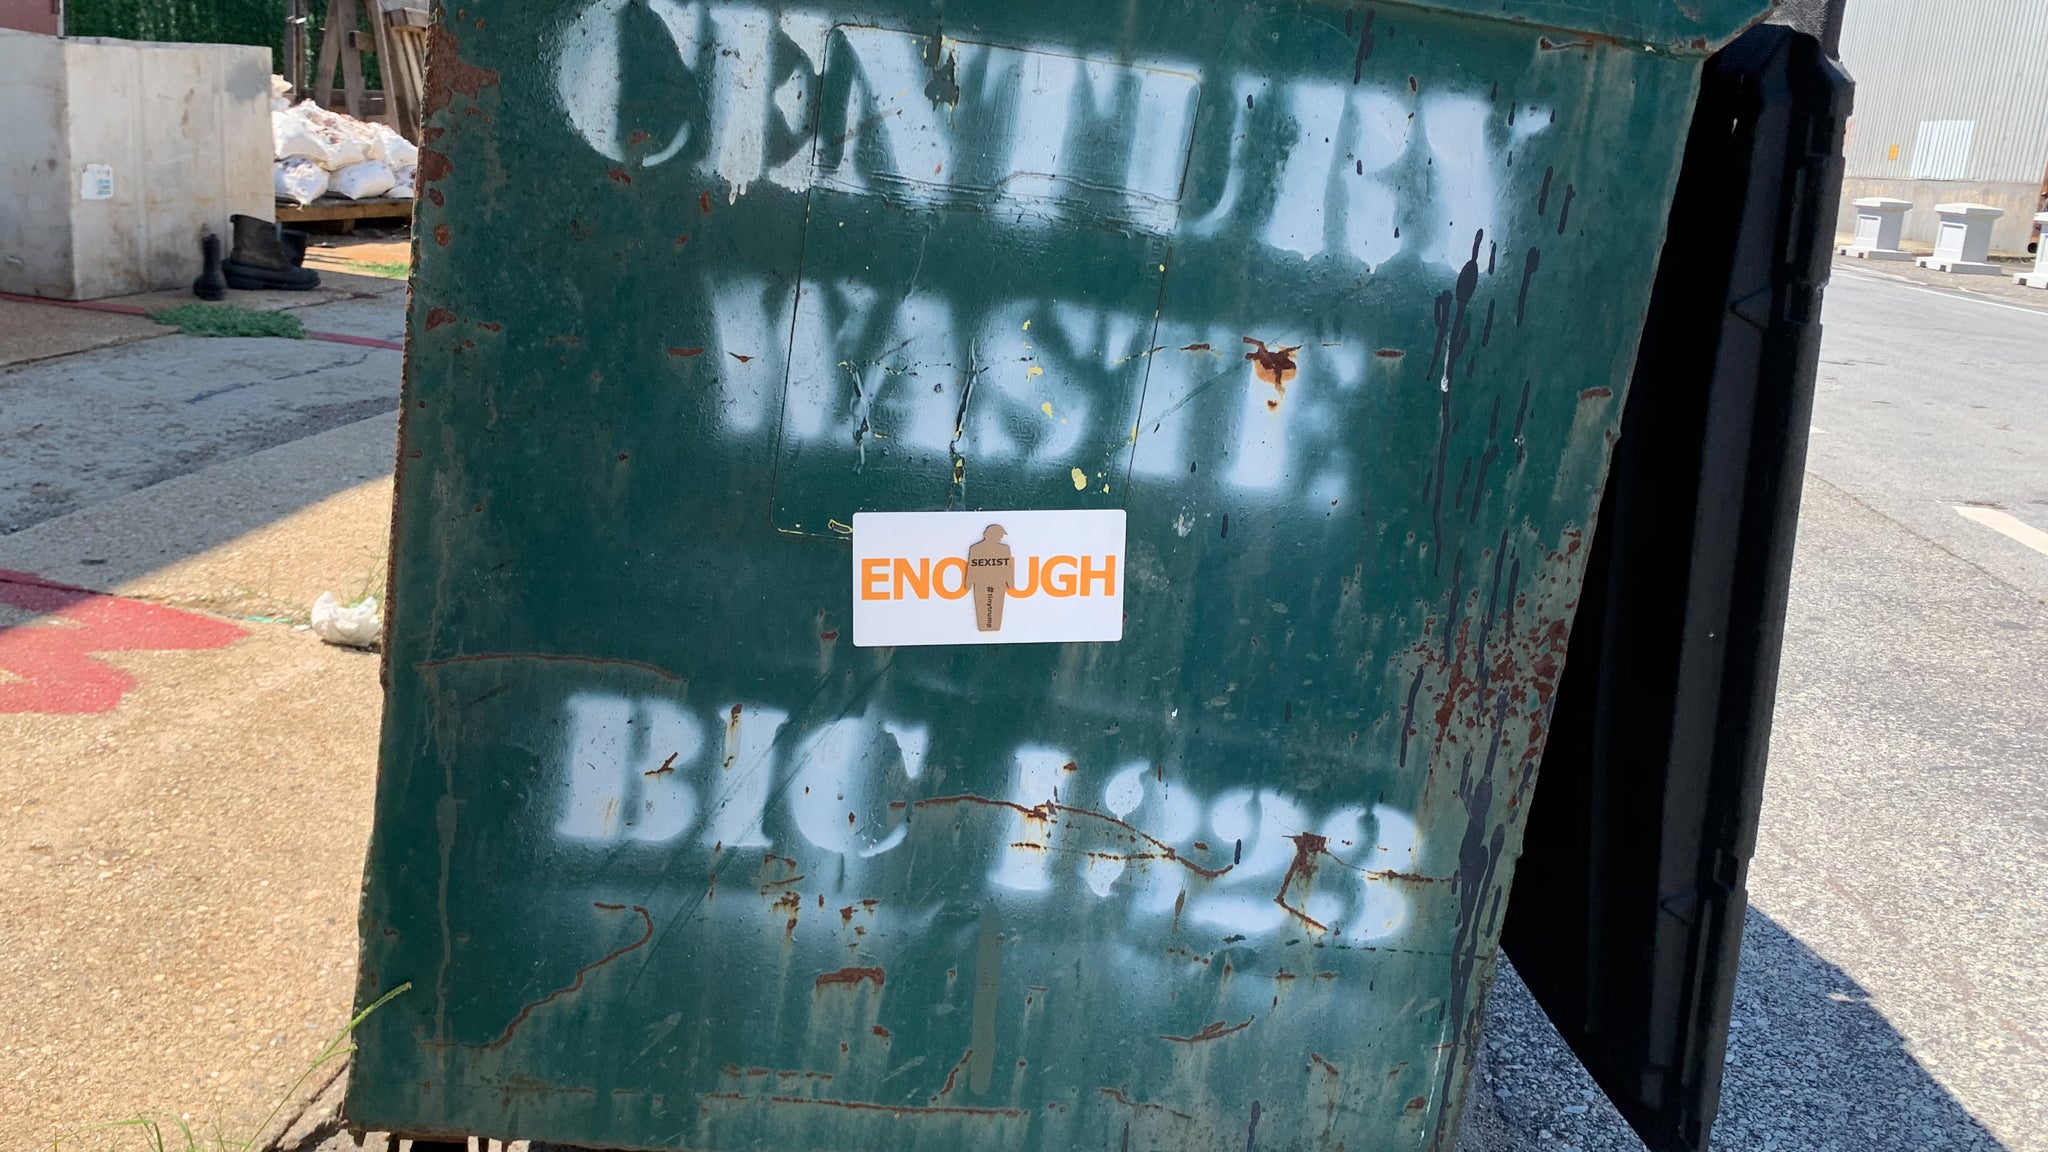 "ENOUGH" tiny trump sticker shown for scale, stuck in the middle of a green Century Waste dumpster